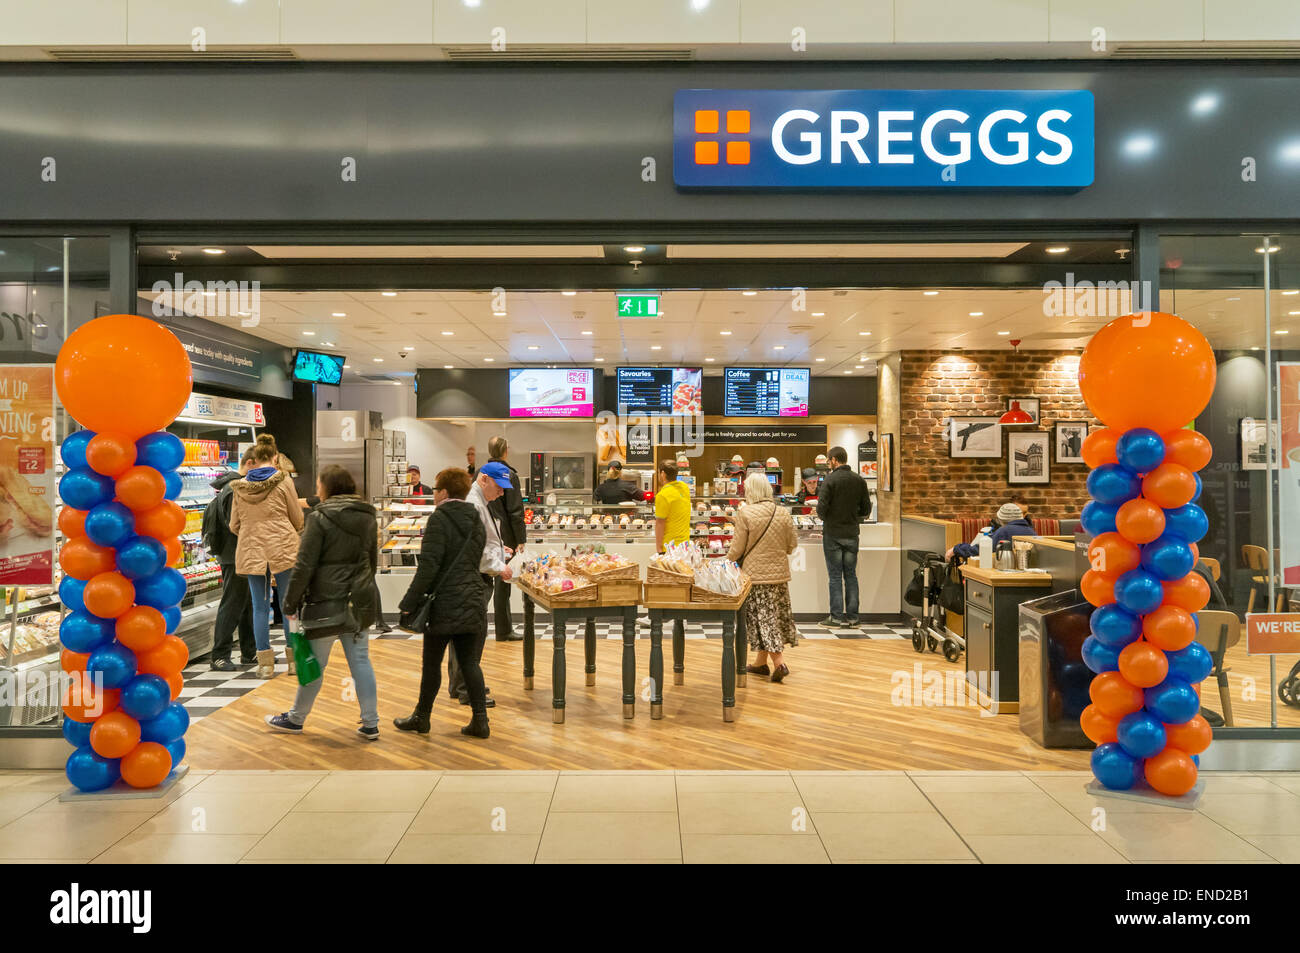 Greggs the bakers shop within Eldon Square shopping centre, Newcastle upon Tyne, north east England, UK Stock Photo